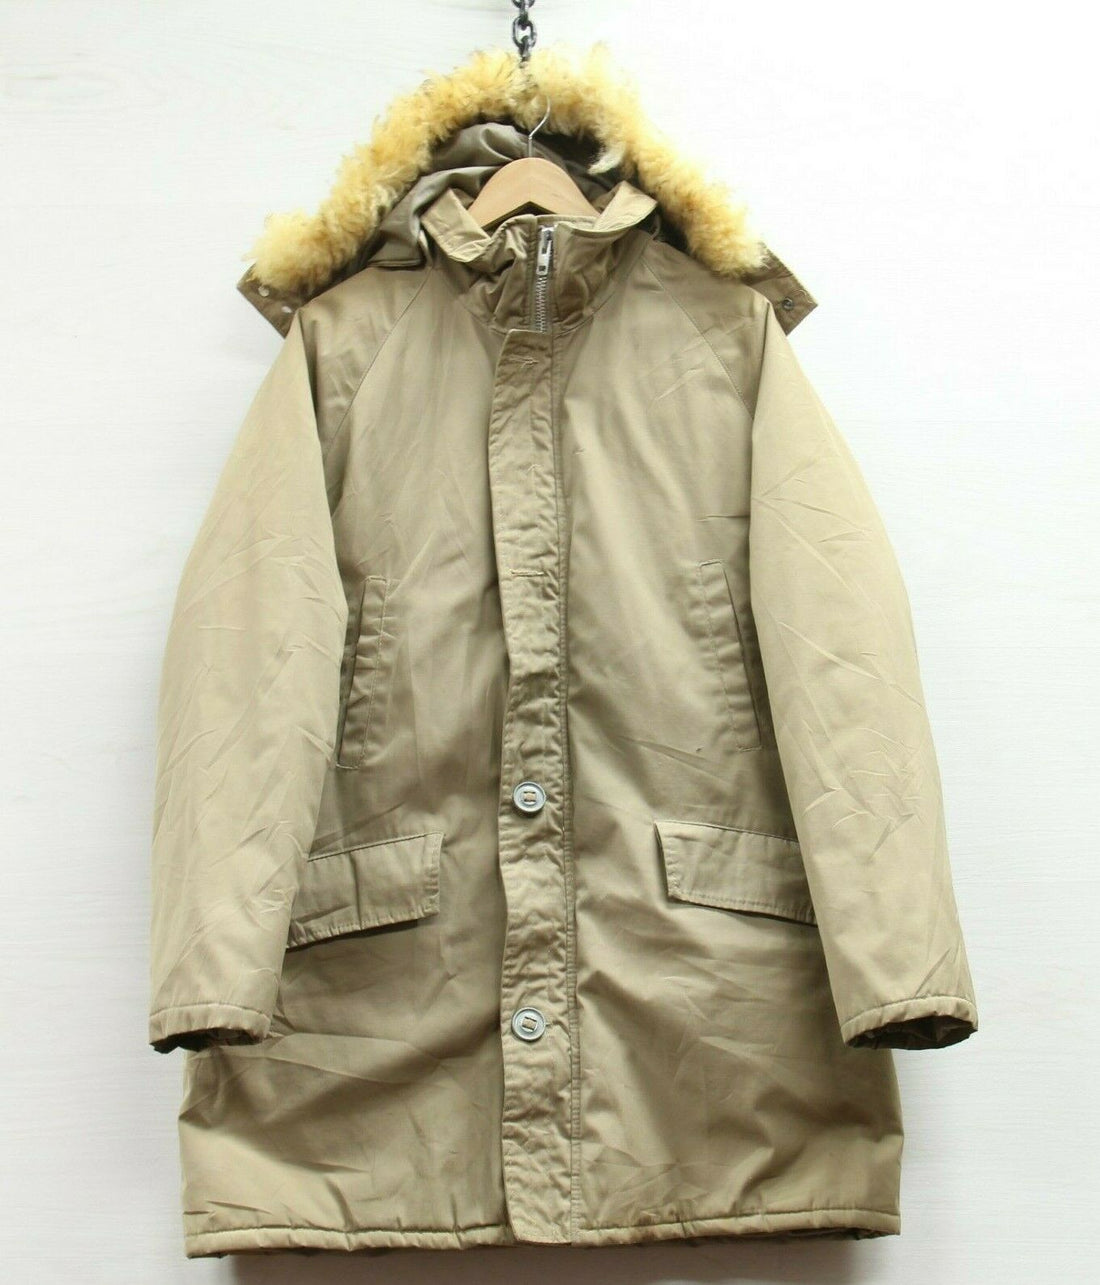 Vintage Sears Parka Puffer Jacket Size 40 Beige Tan Down Insulated Made Canada